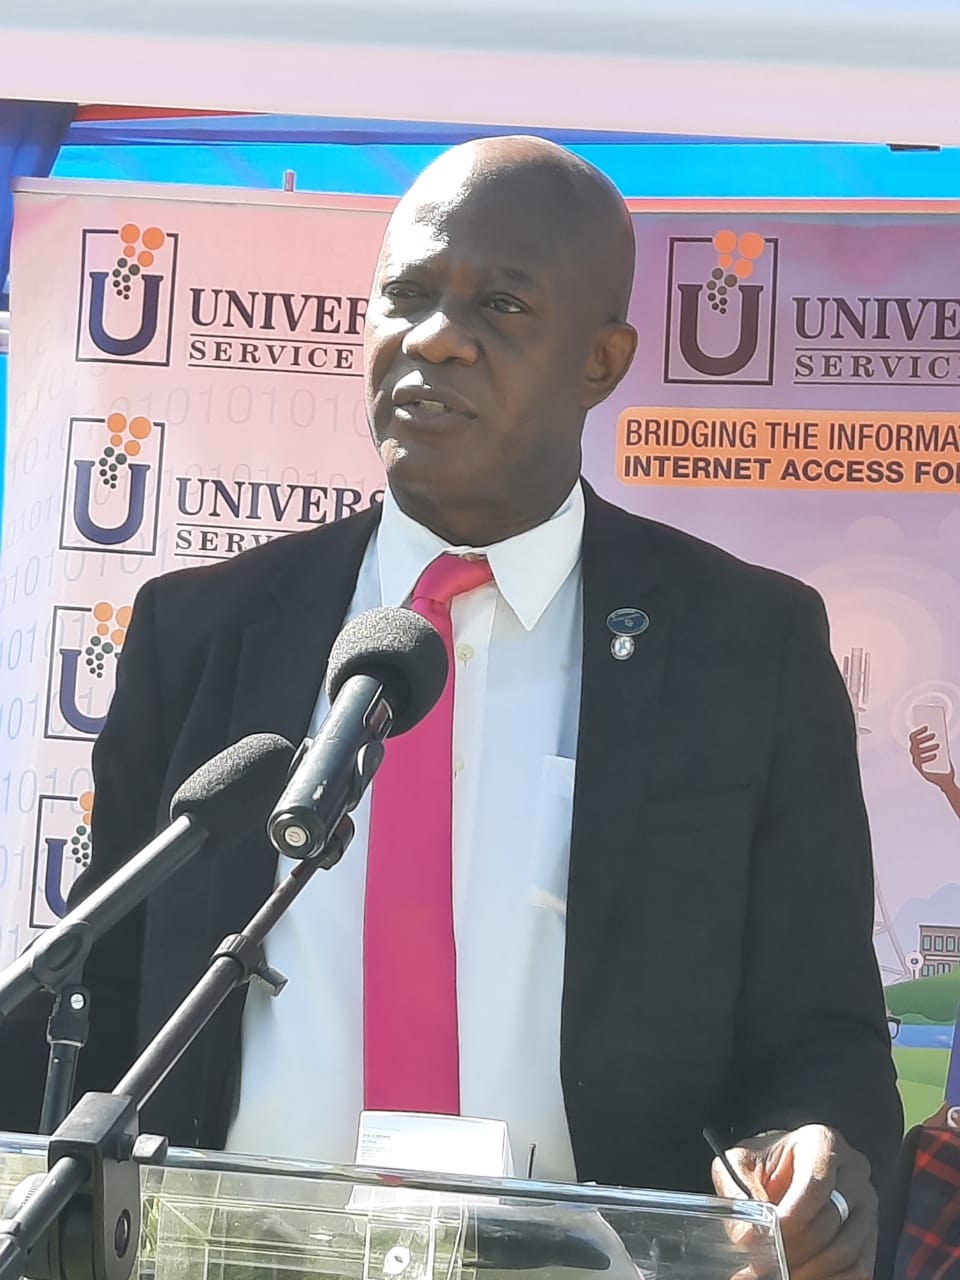 USF On Track To Establish 189 Wi-Fi Hotspots By March 2022